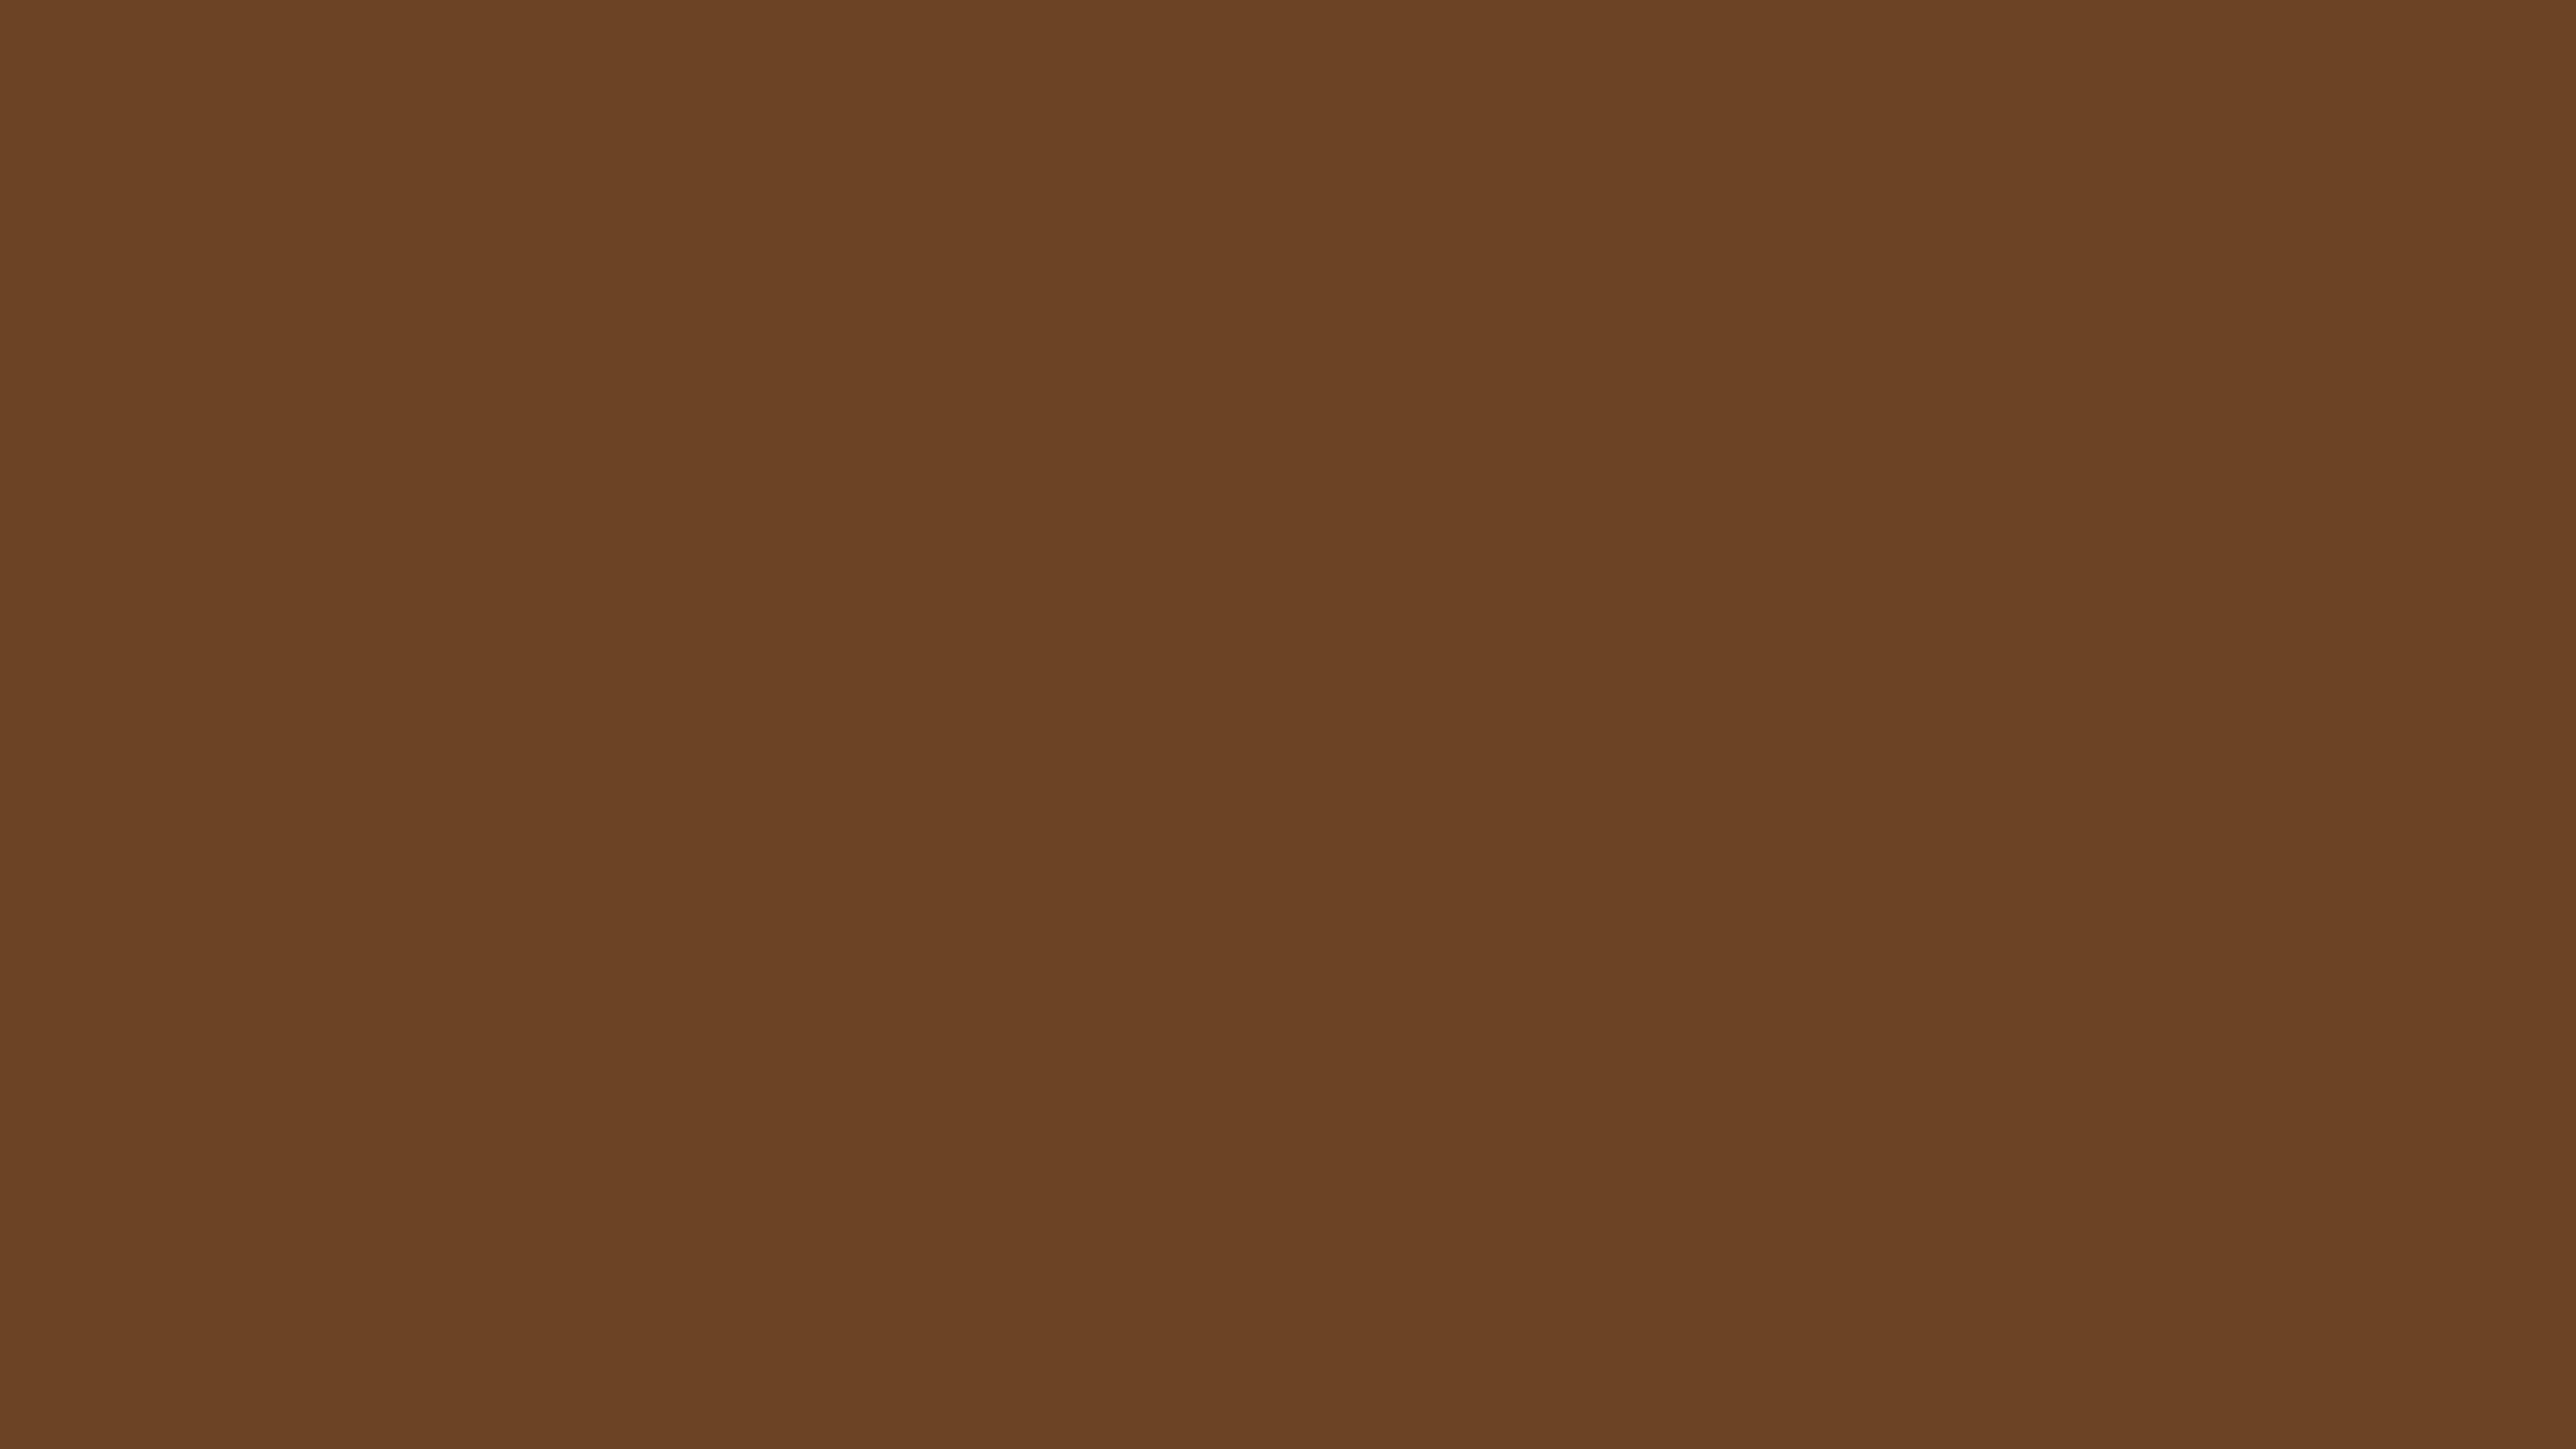 4096x2304 Brown-nose Solid Color Background